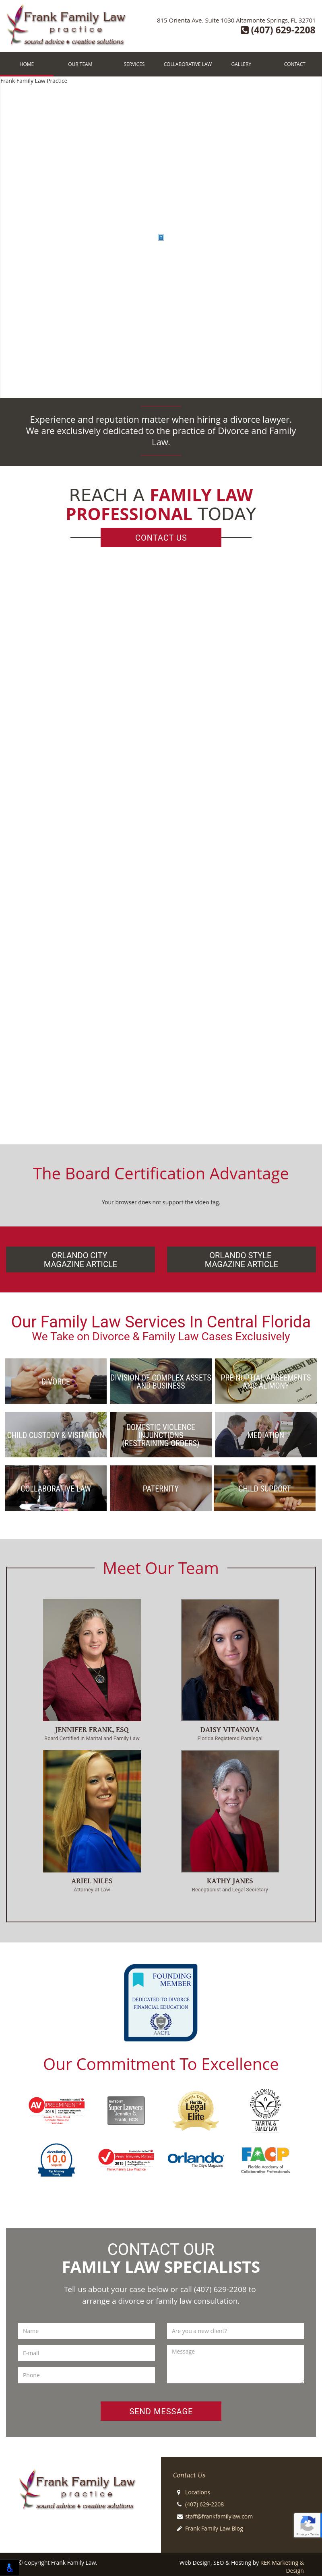 Frank Family Law Practice - Altamonte Springs FL Lawyers